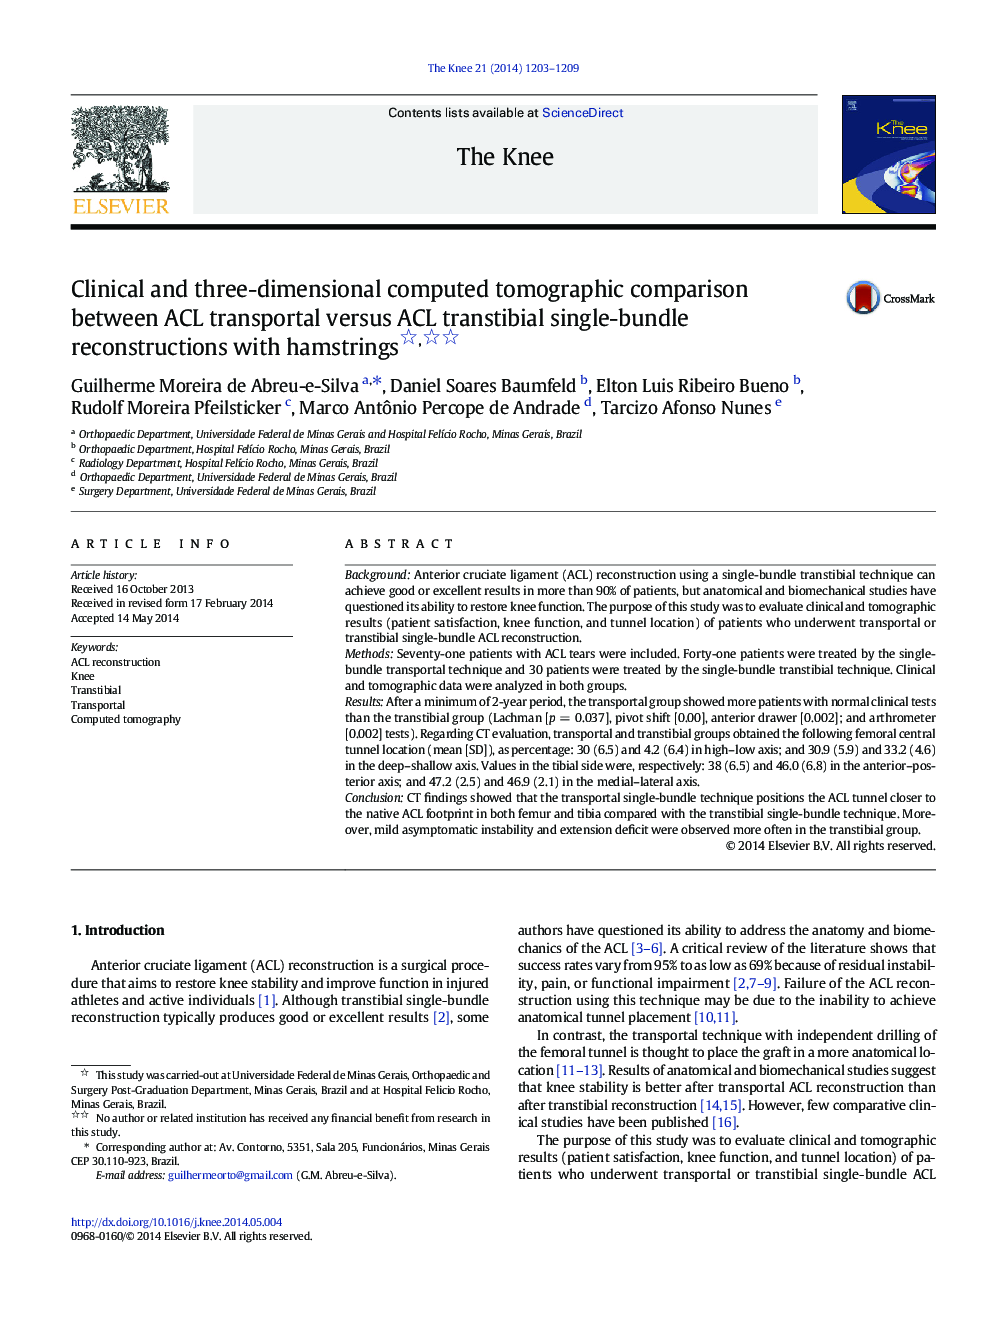 Clinical and three-dimensional computed tomographic comparison between ACL transportal versus ACL transtibial single-bundle reconstructions with hamstrings